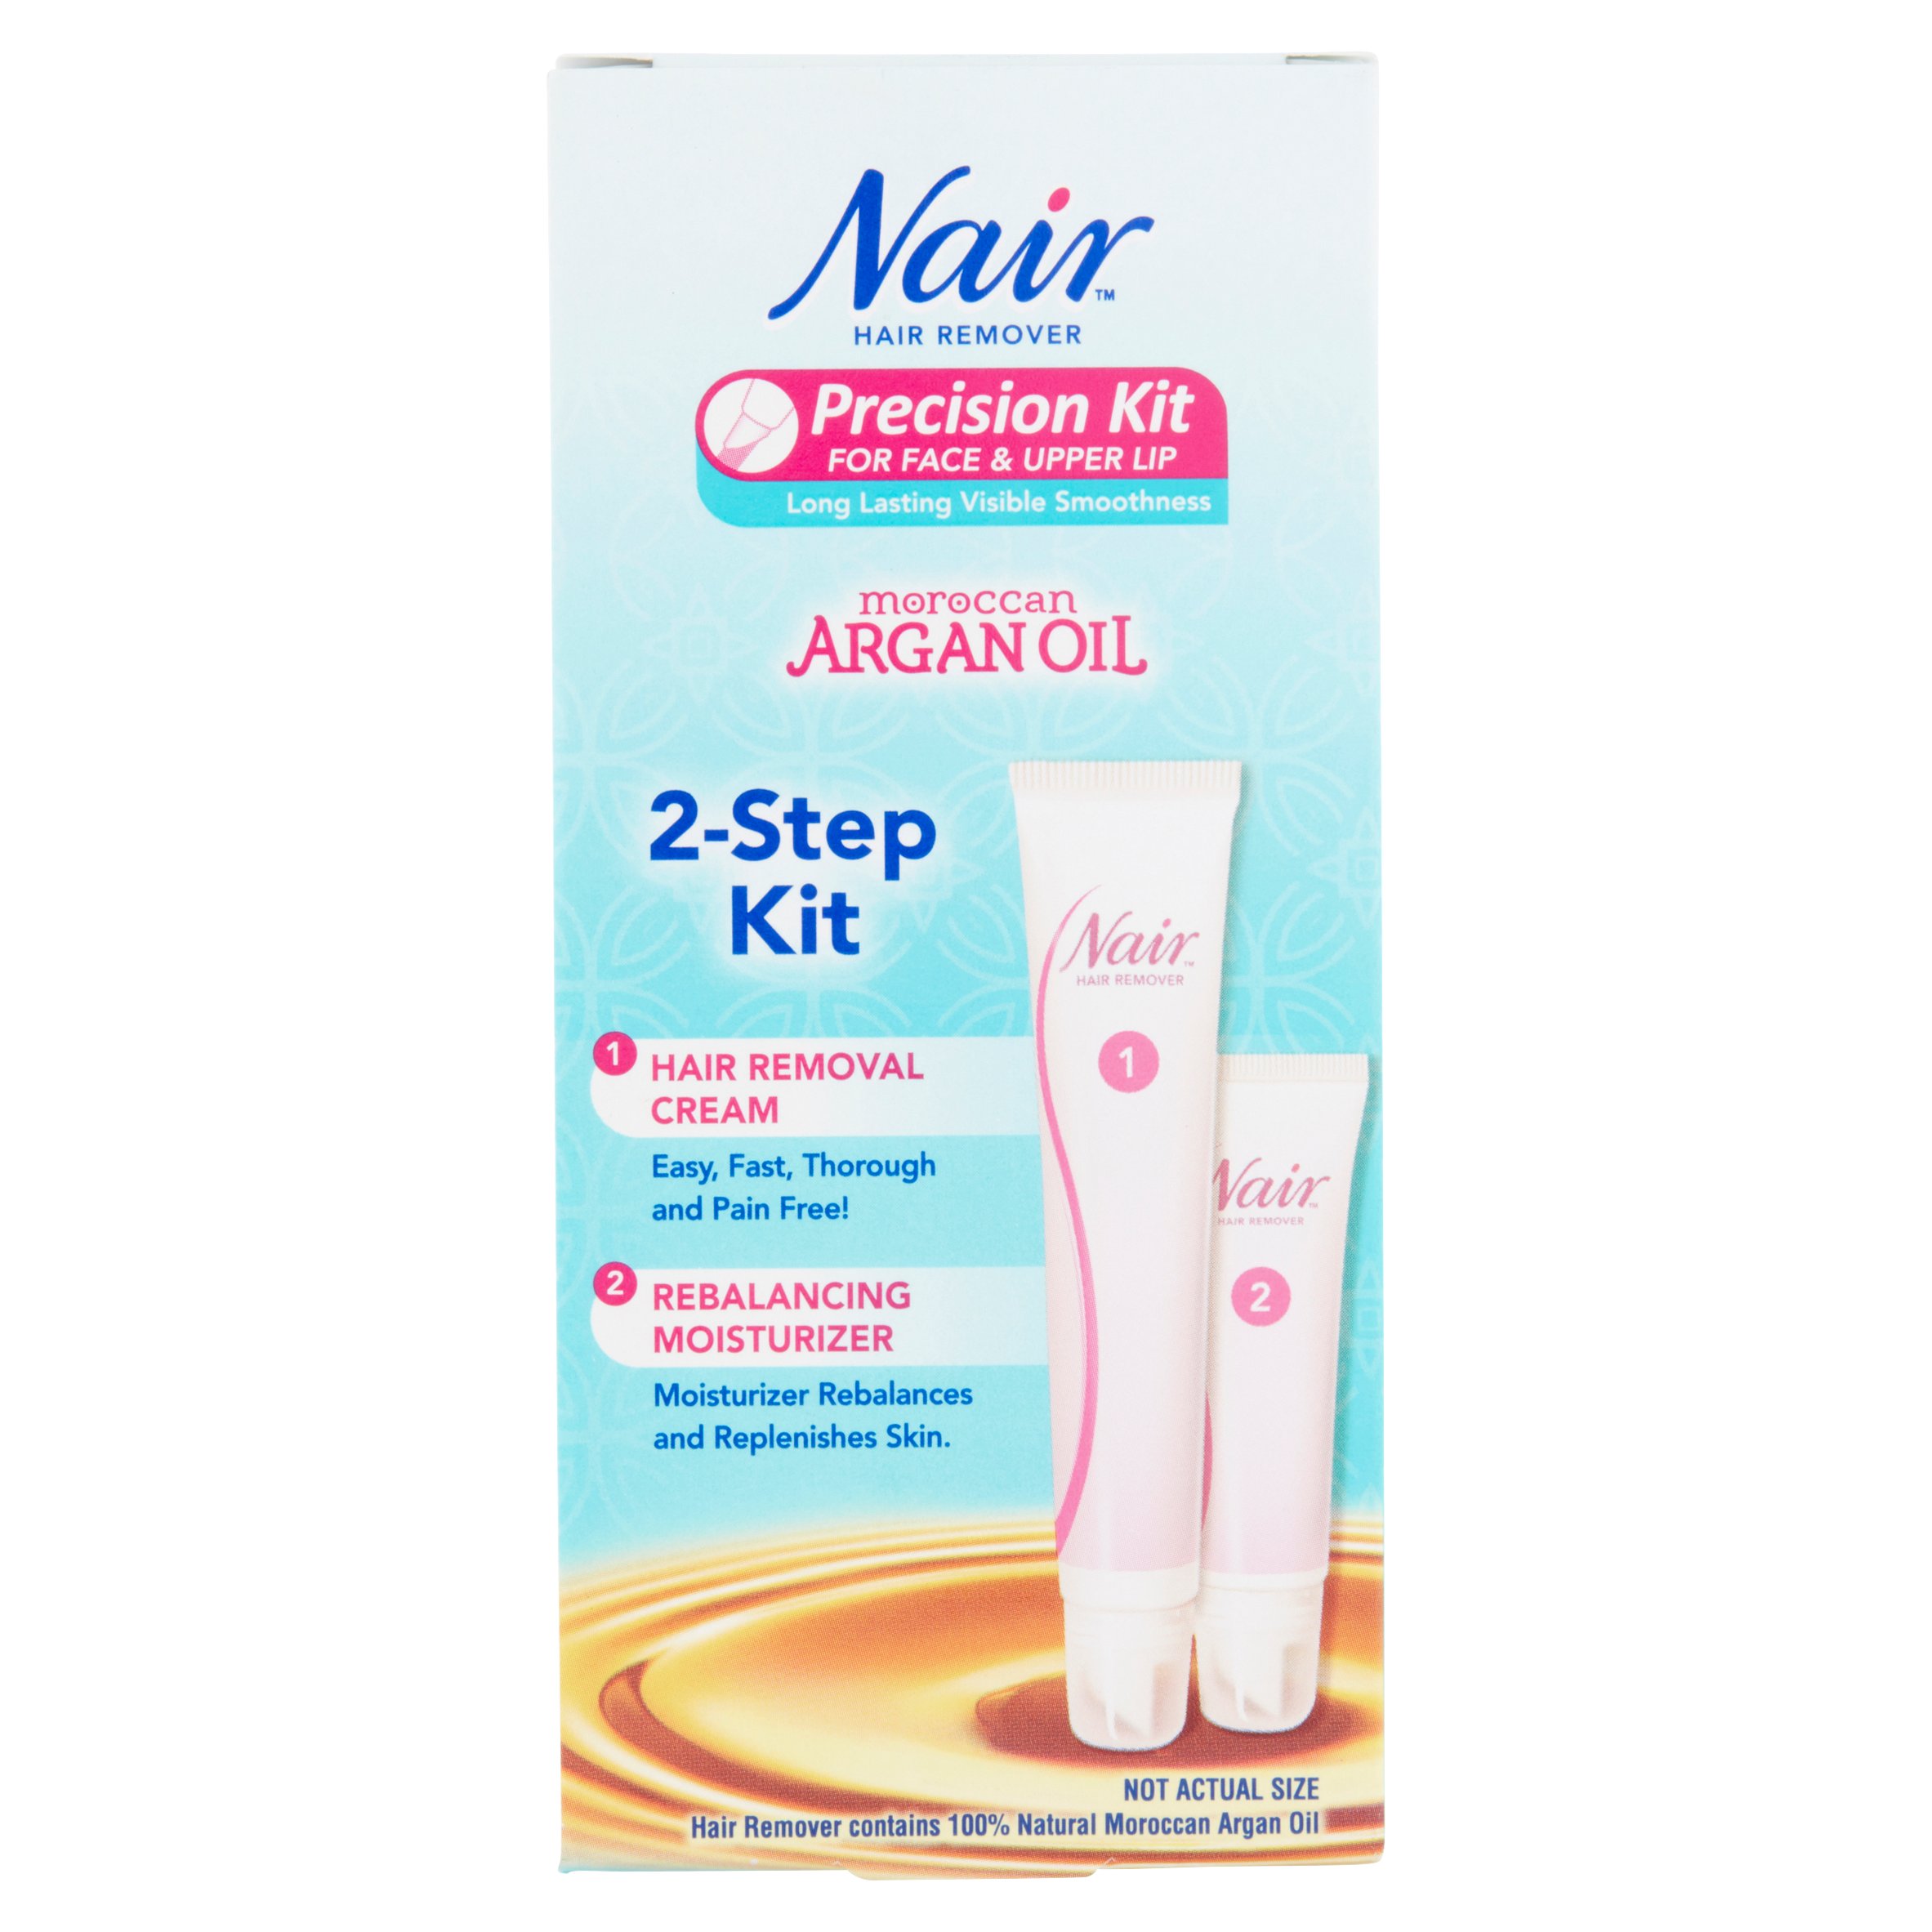 Nair Precision Kit for Face & Upper Lip Hair Remover - image 5 of 6